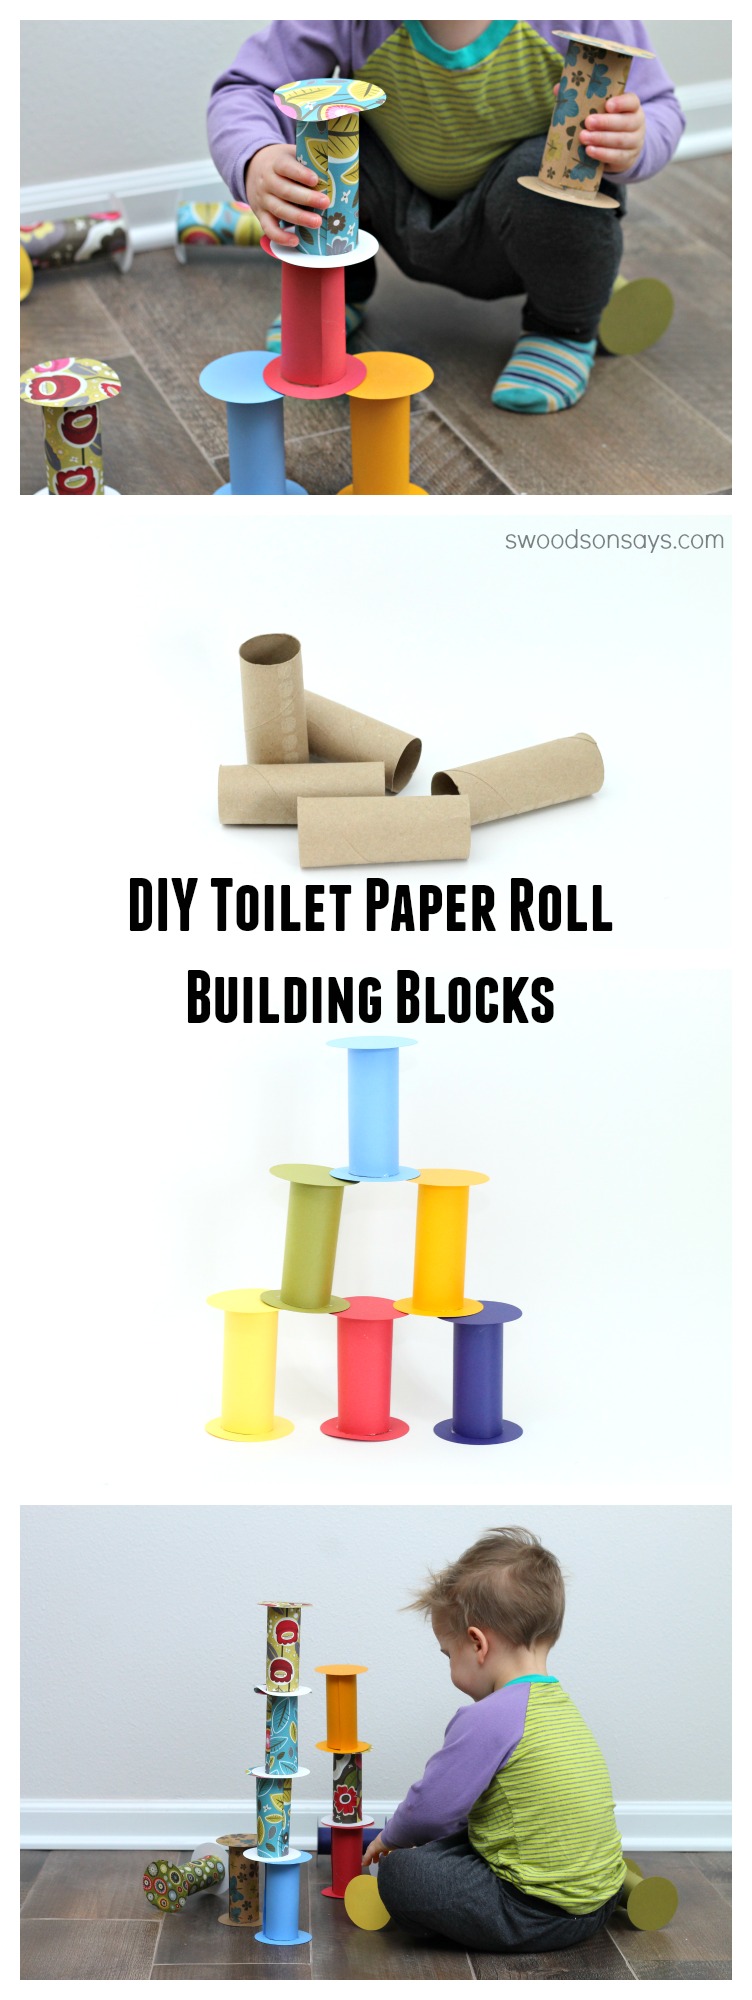 Toilet Paper Roll Toy DIY